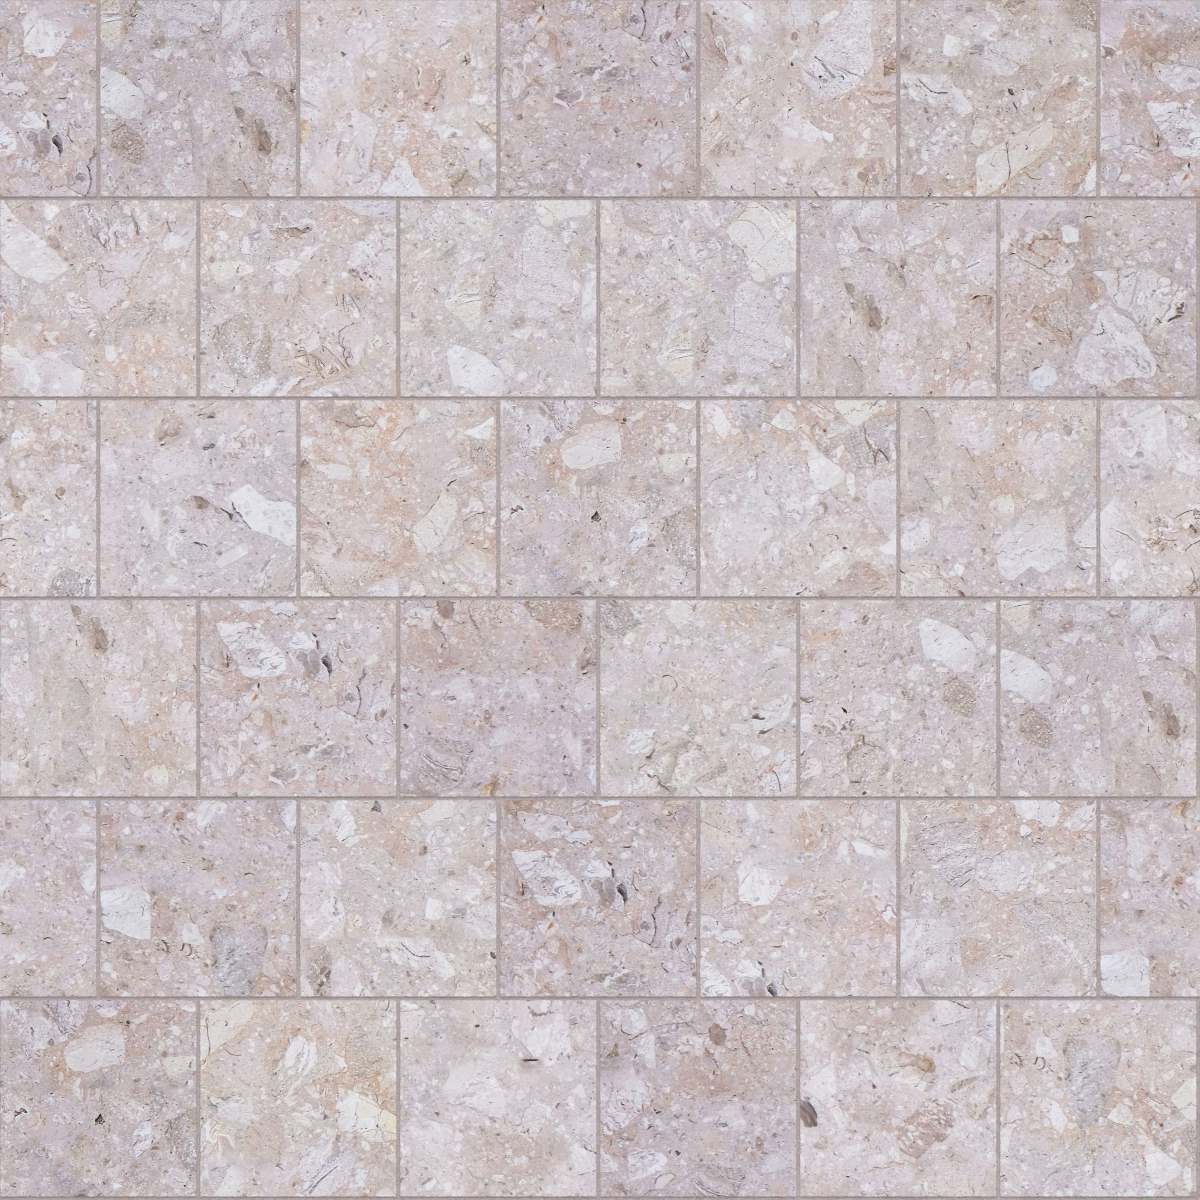 A seamless concrete texture with sabbia terrazzo blocks arranged in a Stretcher pattern